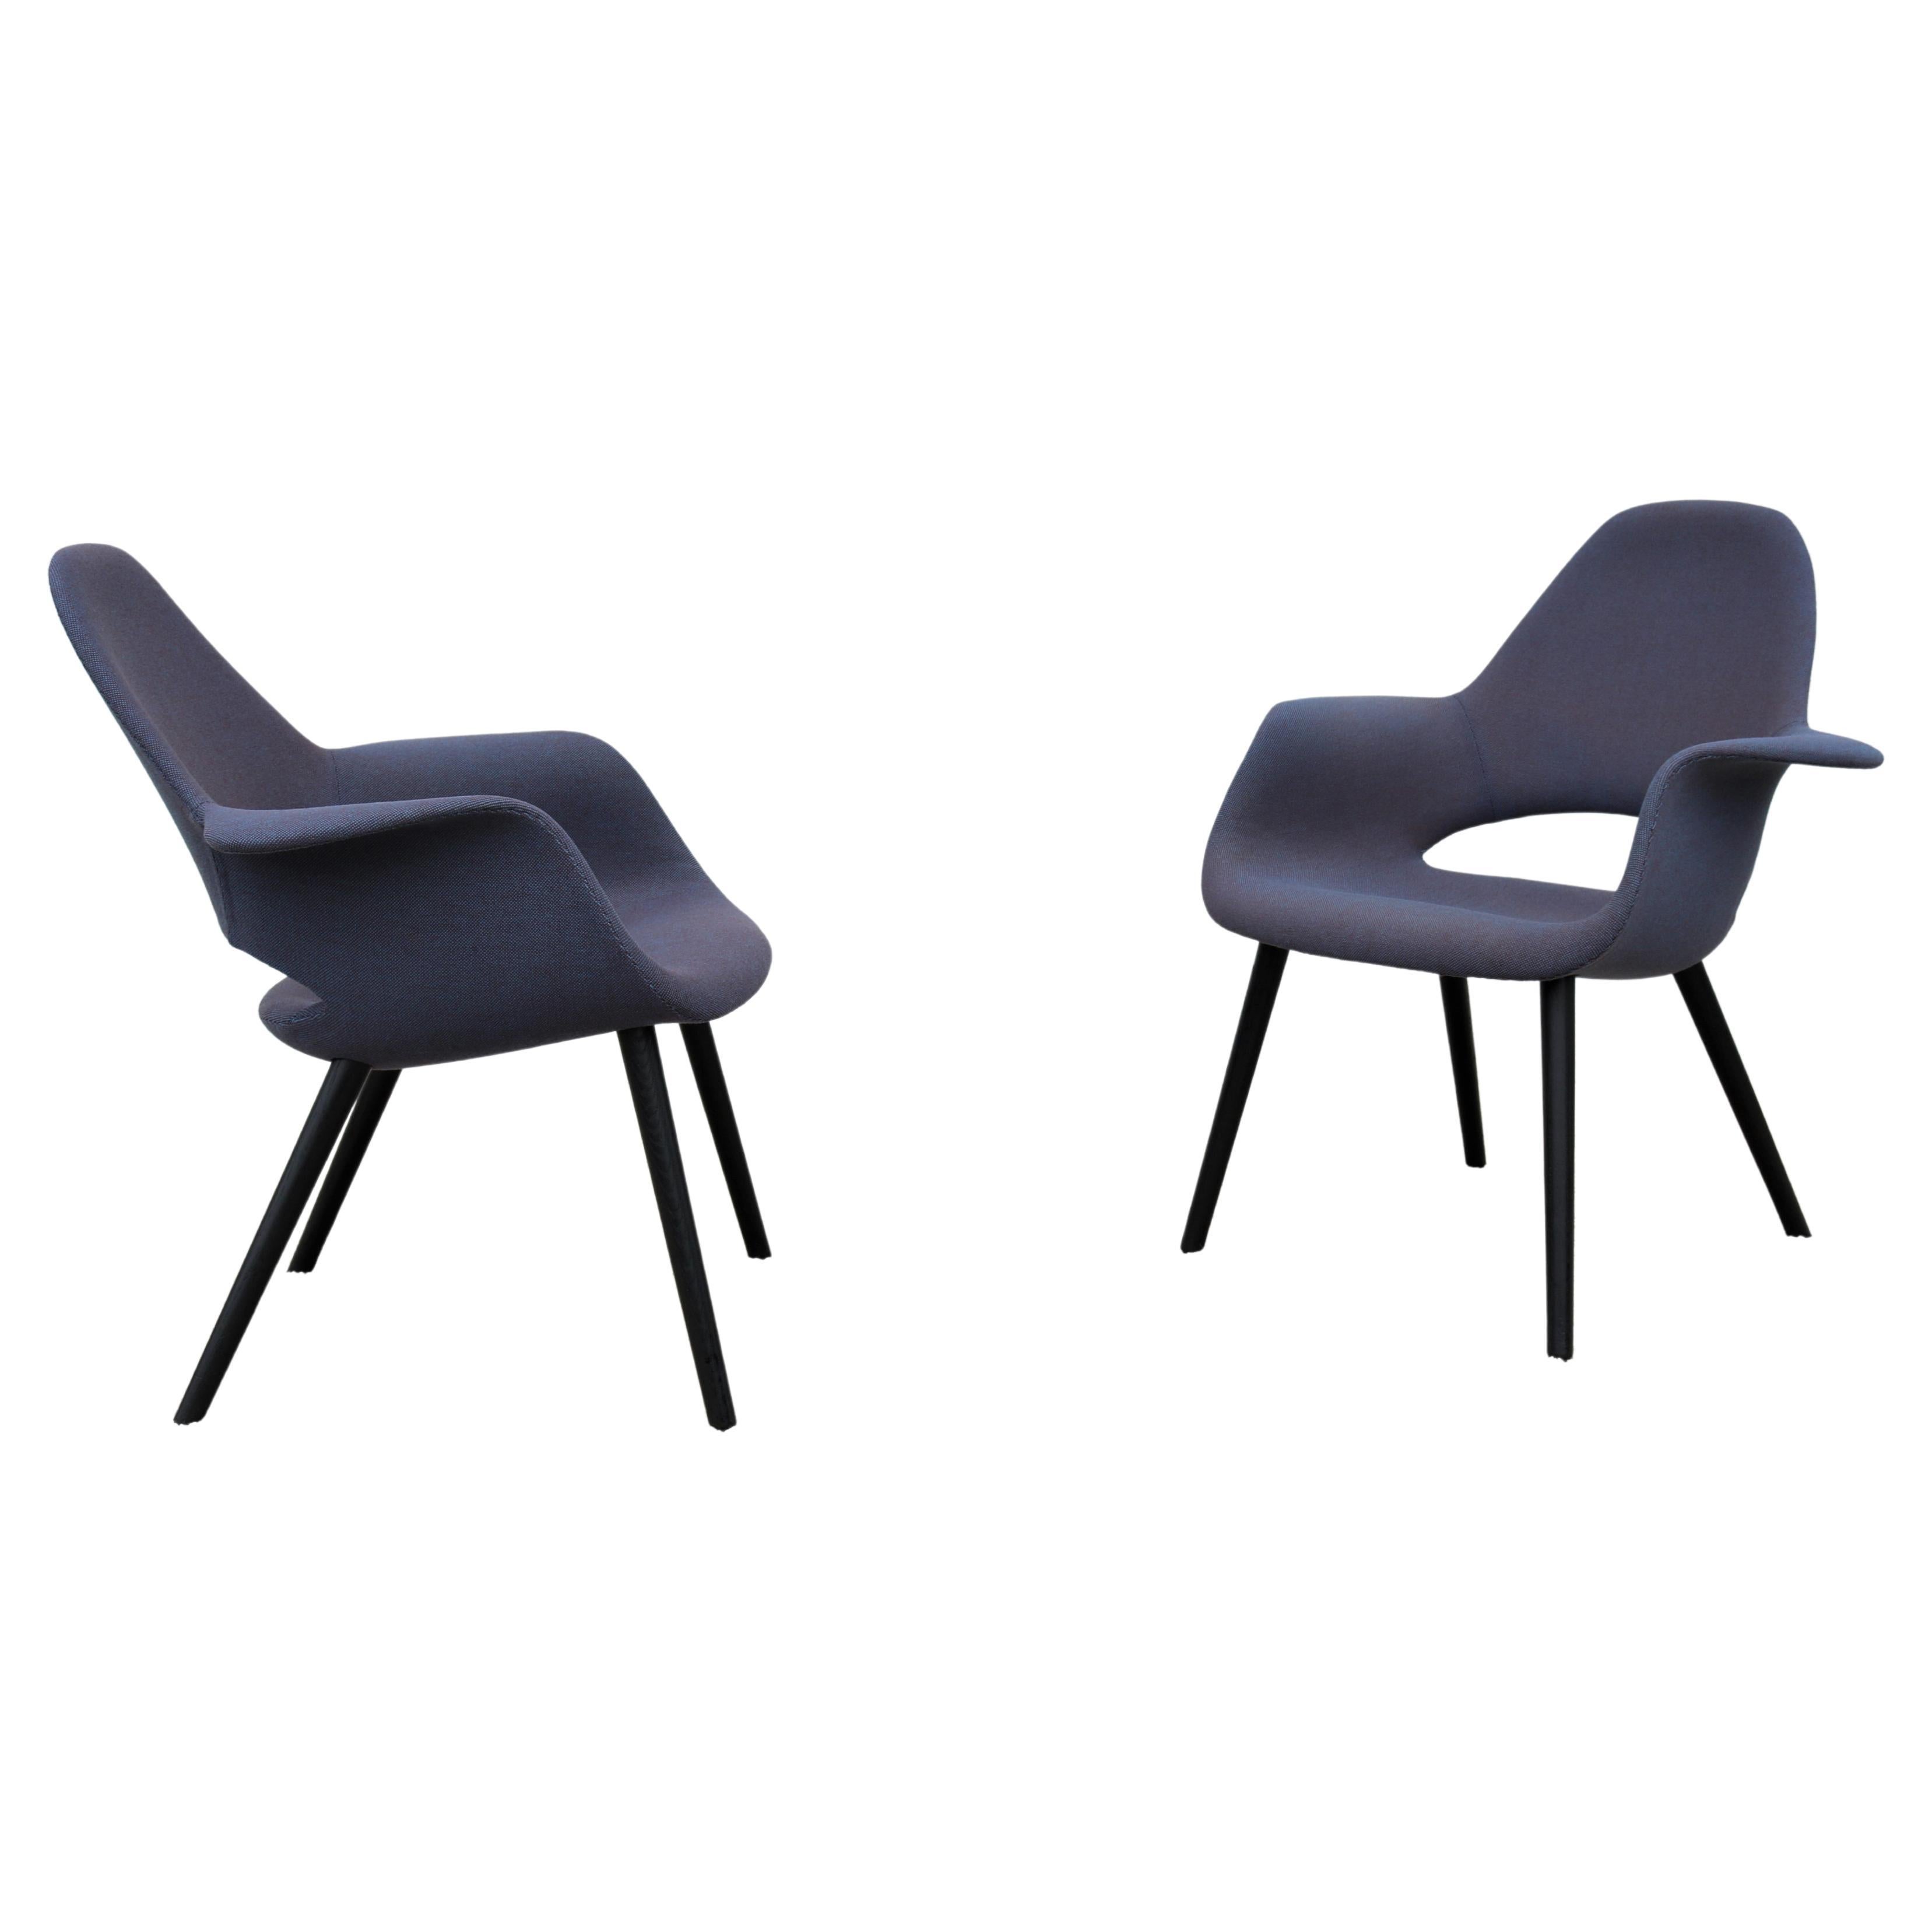 Mid-Century Charles Eames & Eero Saarinen for Vitra Organic Dining Chairs Pair For Sale